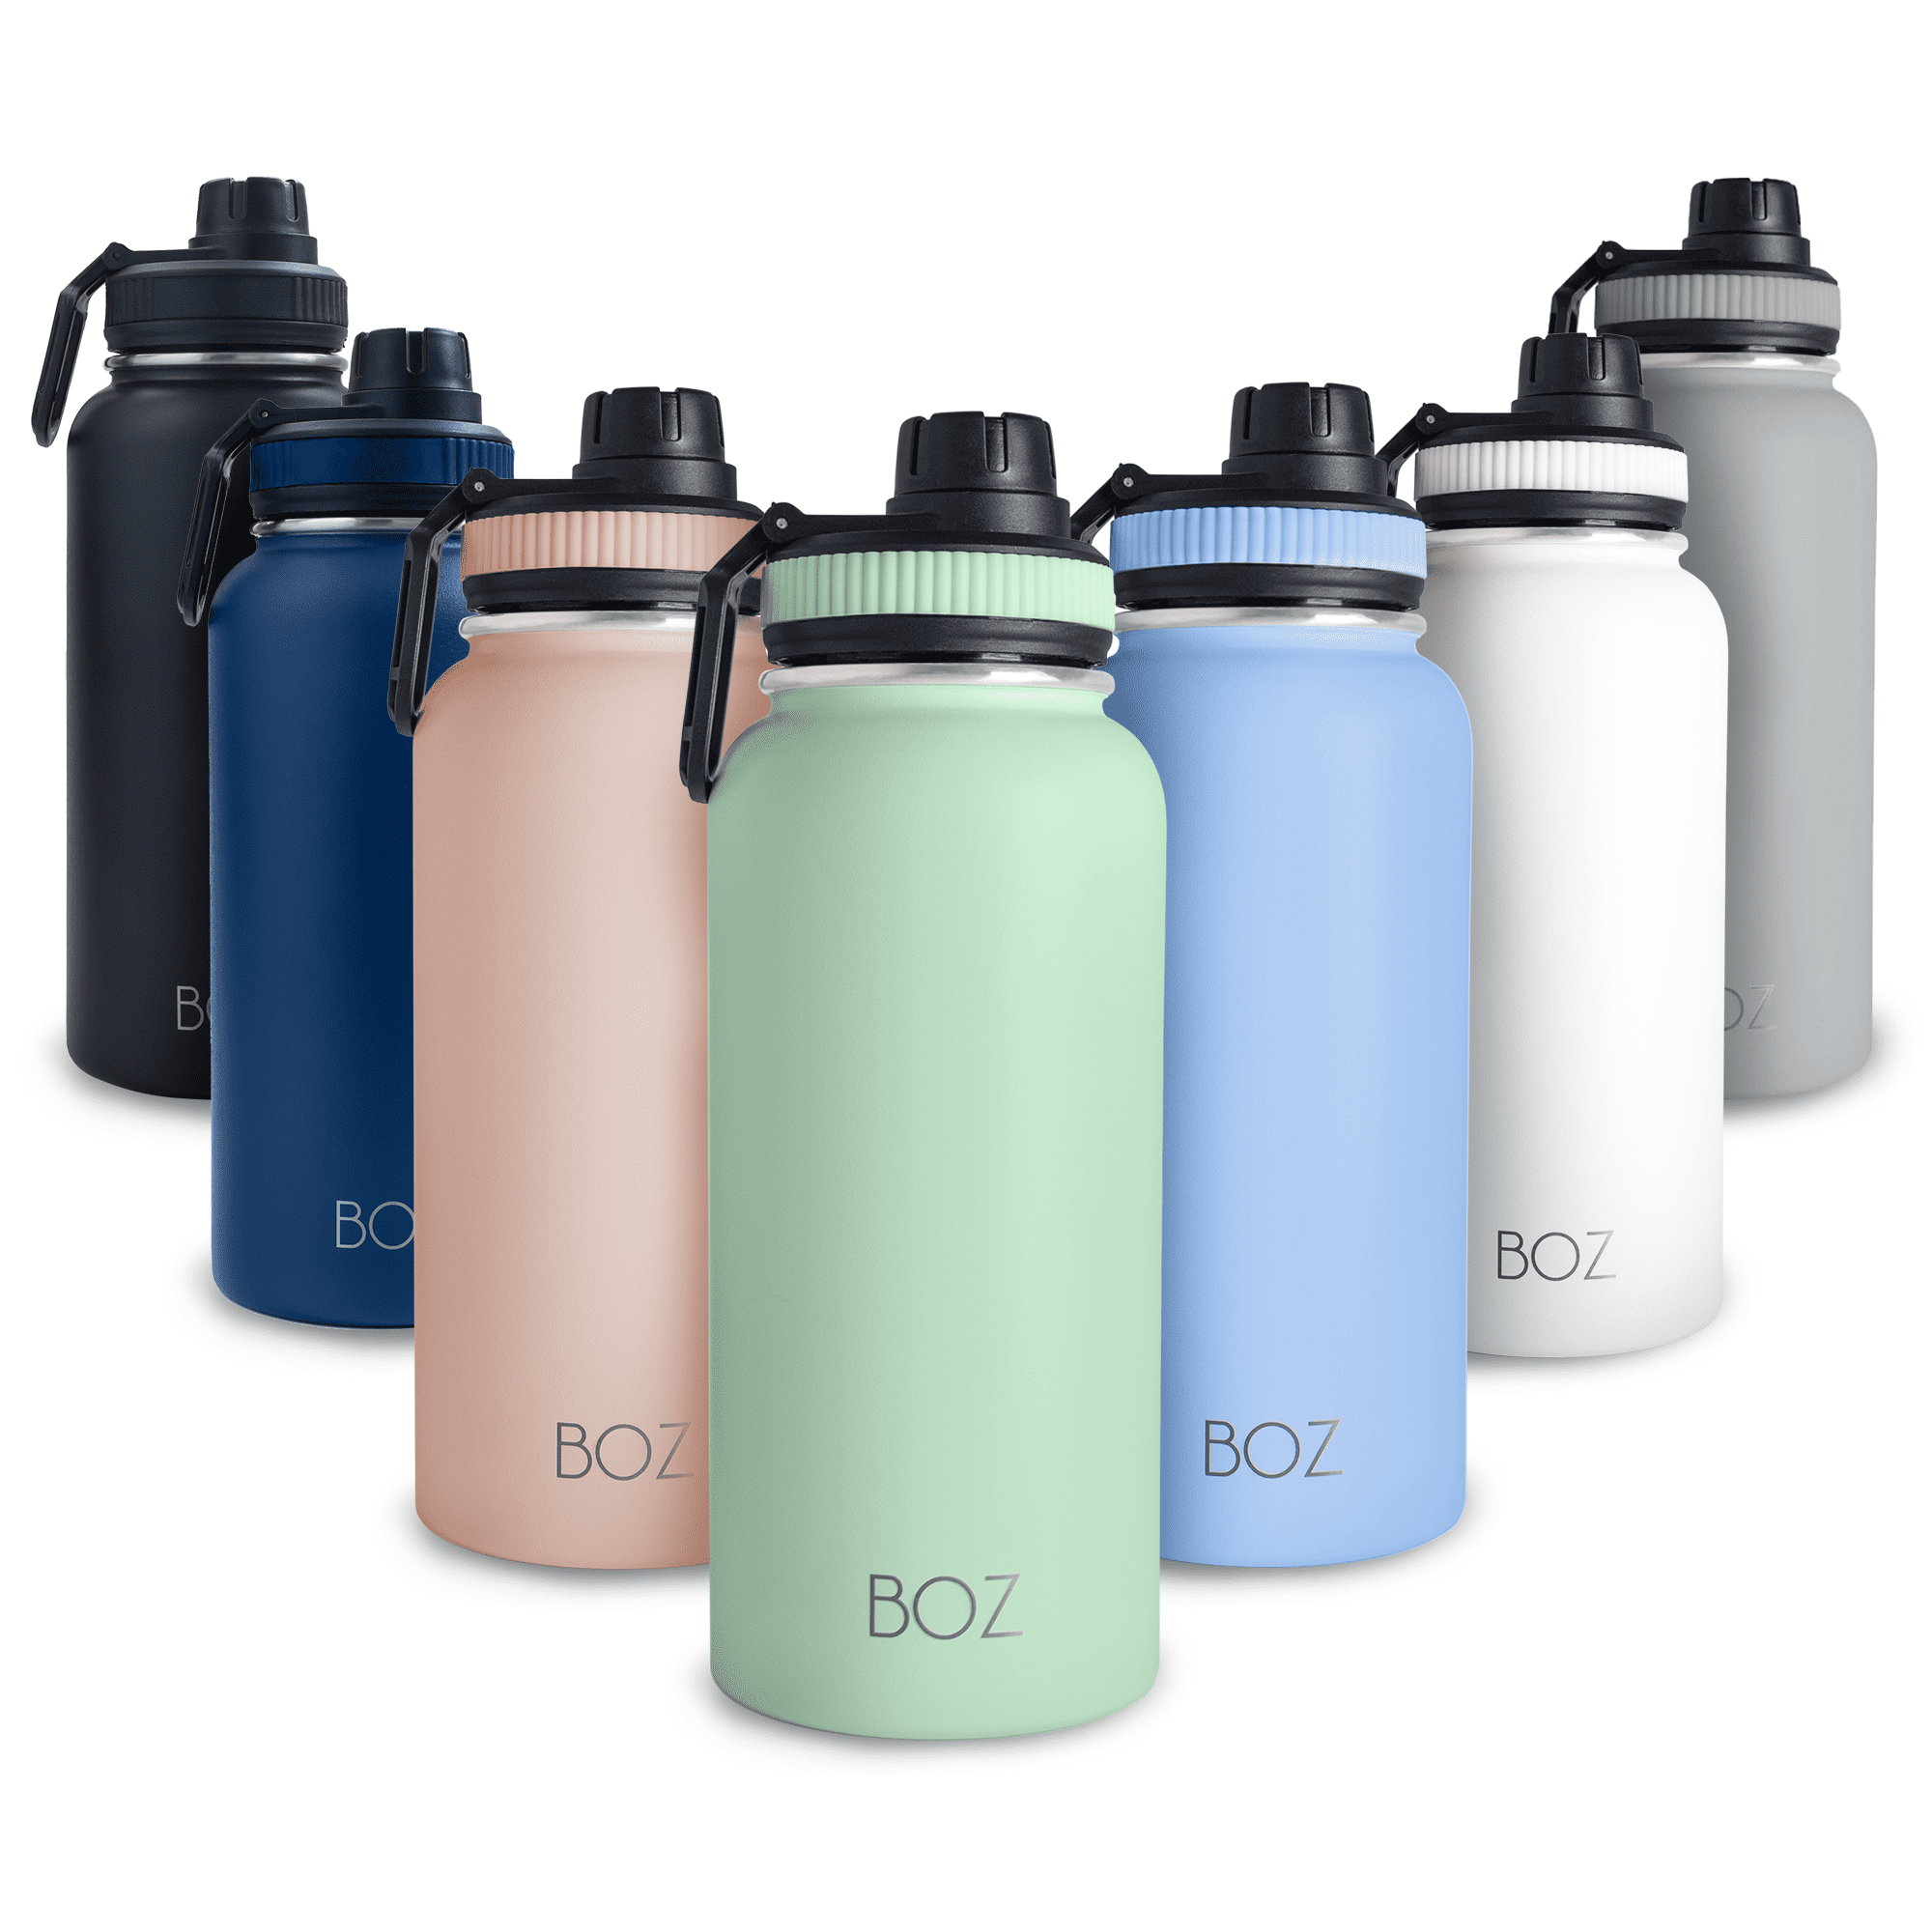 Milifox 12 oz Insulated Water Bottle, Double Wall Vacuum Insulated  Stainless Steel Water Bottles - Wide Mouth Leakproof BPA Free Water Bottle  with